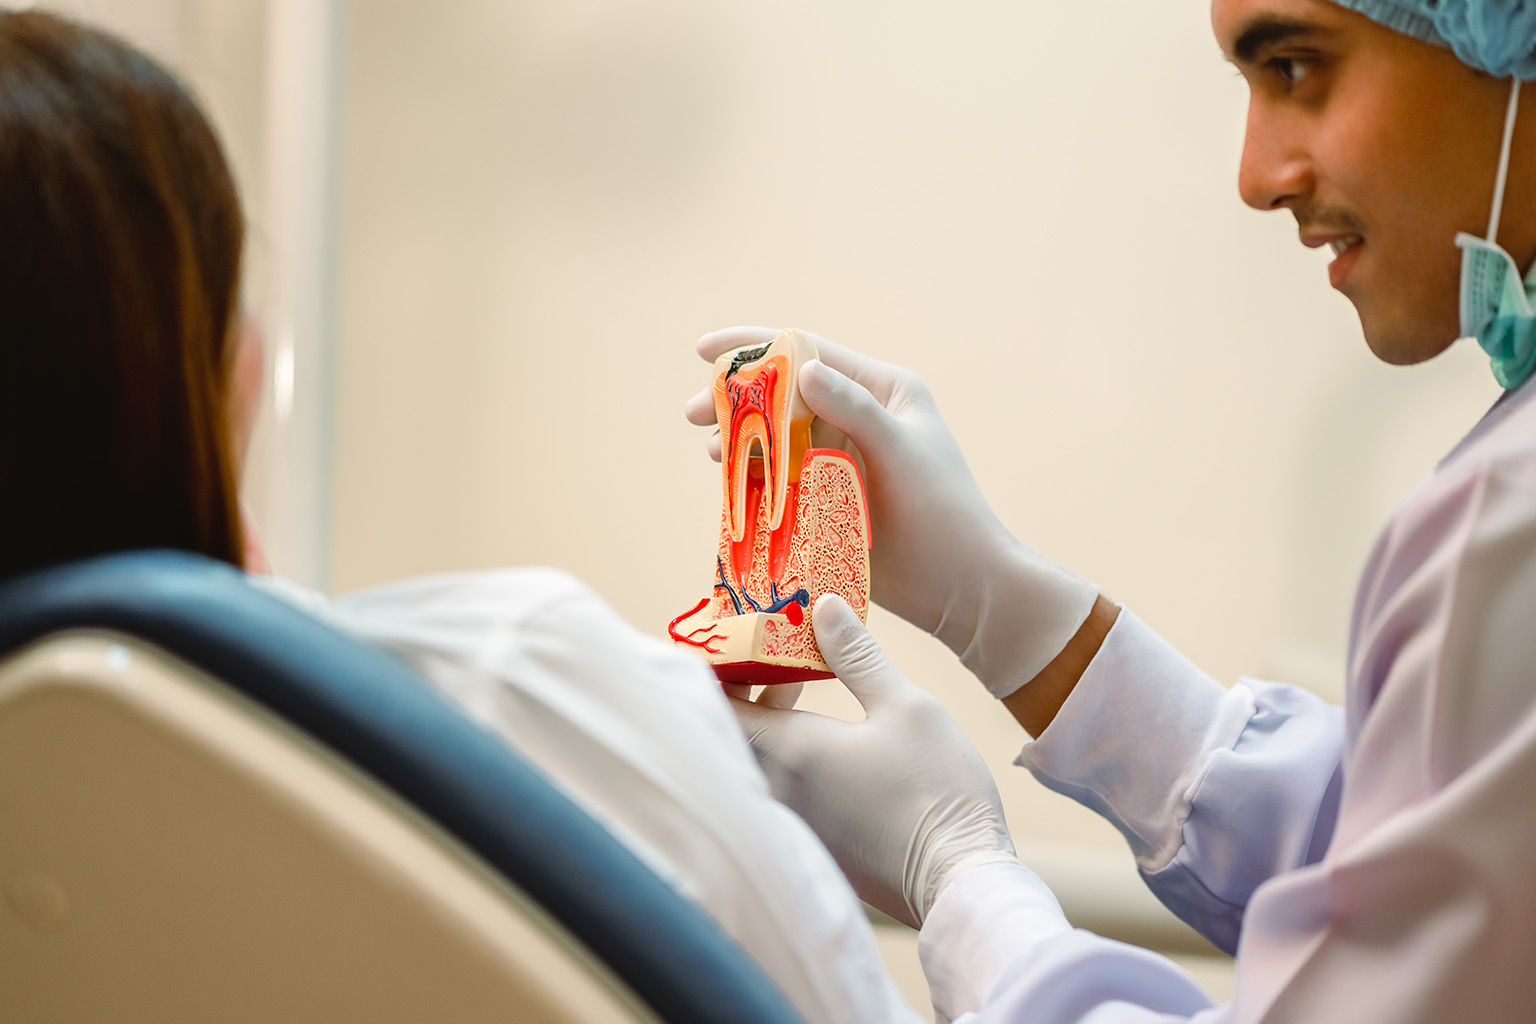 doctor showing a tooth model with the anatomy exposed to a patient